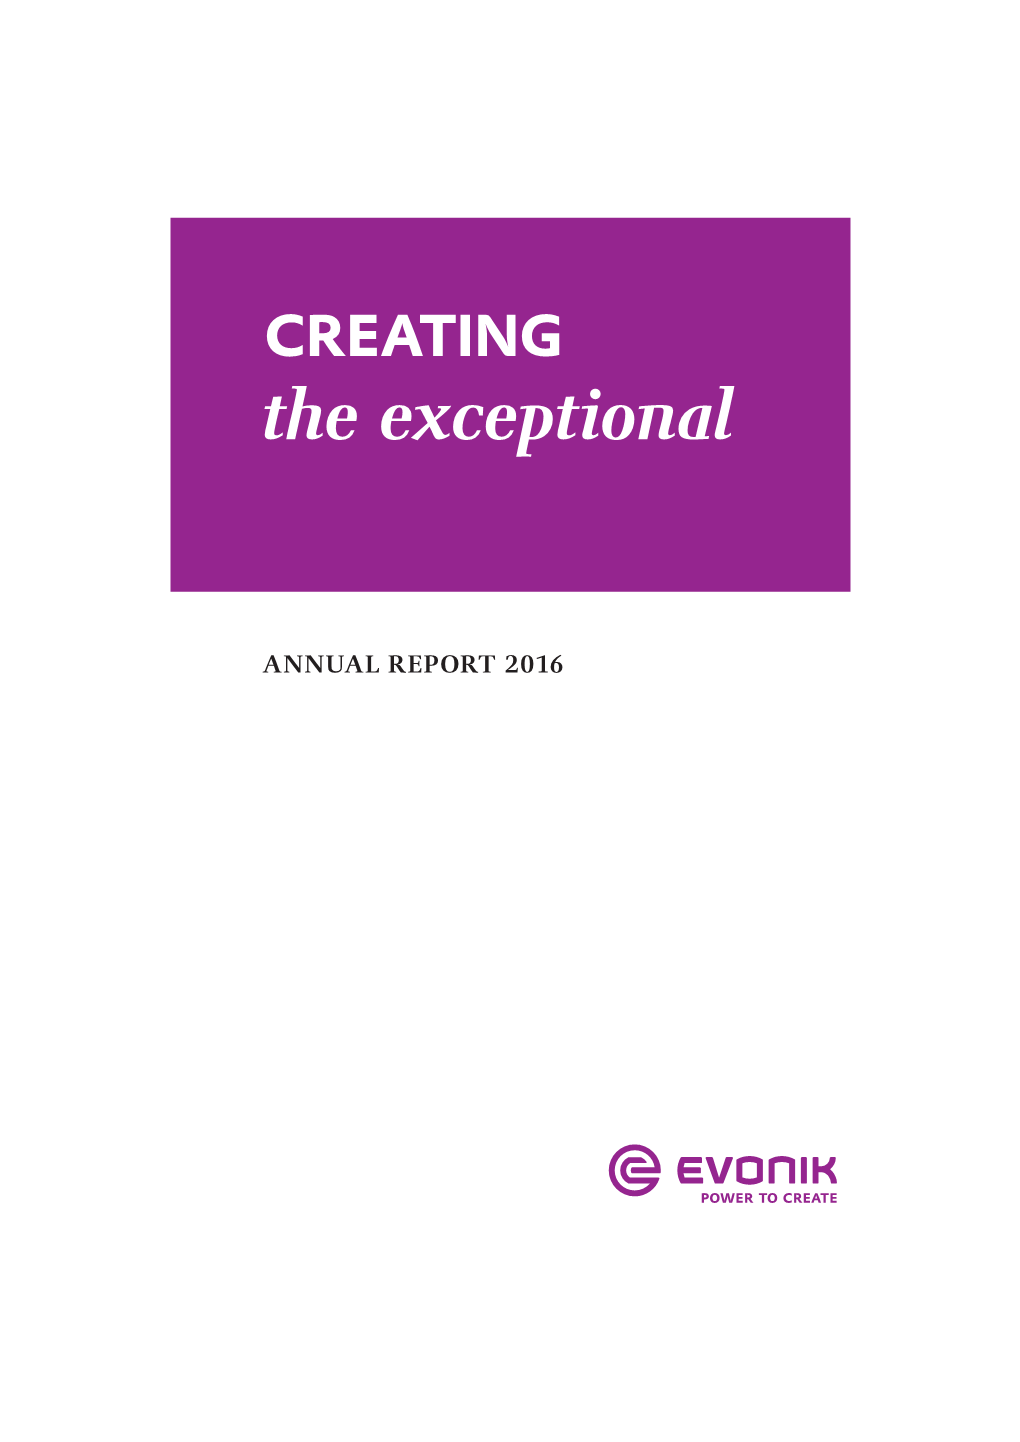 CREATING the Exceptional